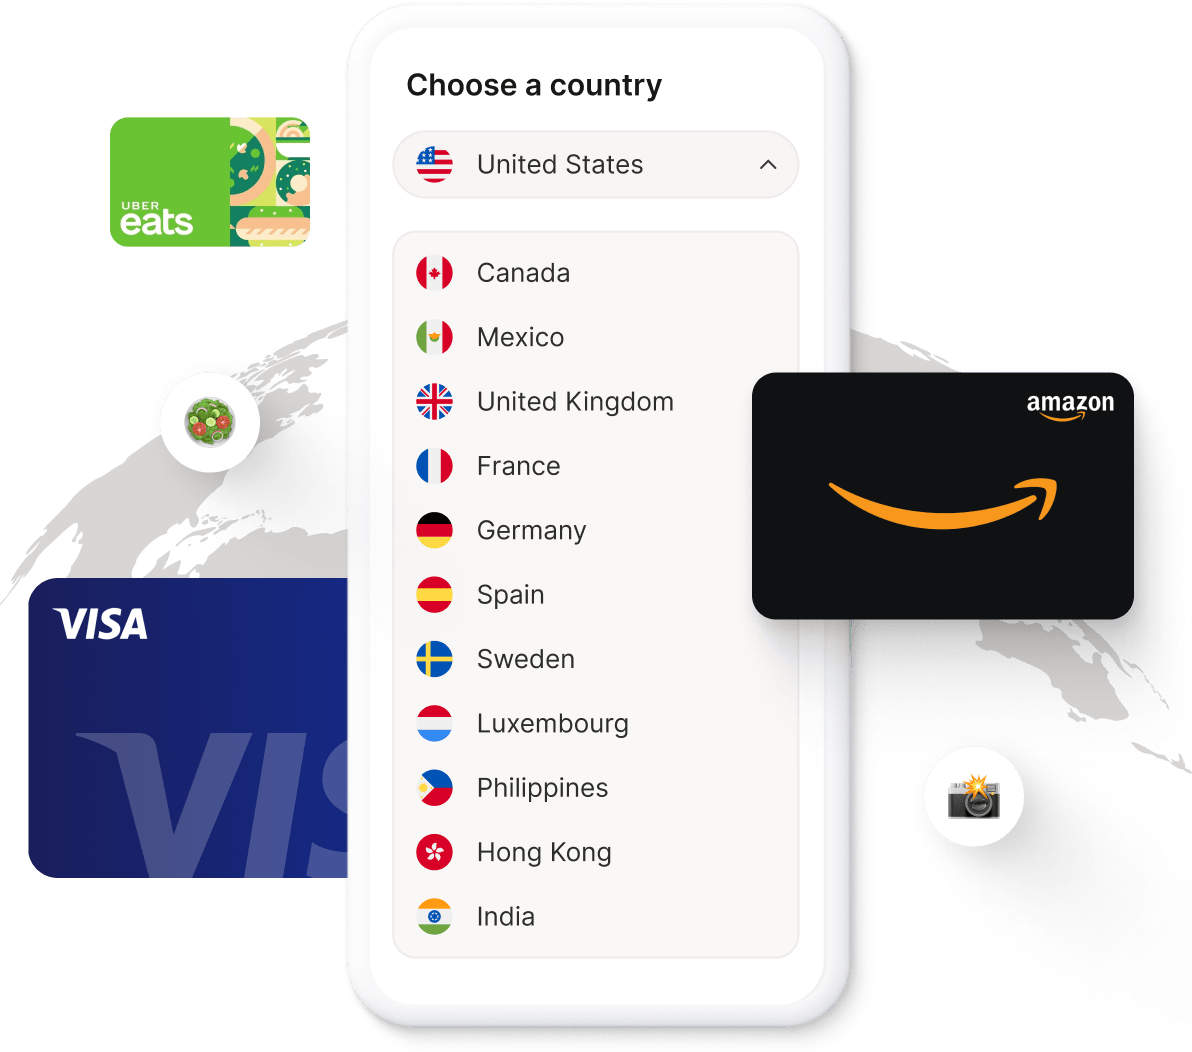 Sending gift cards and payments internationally